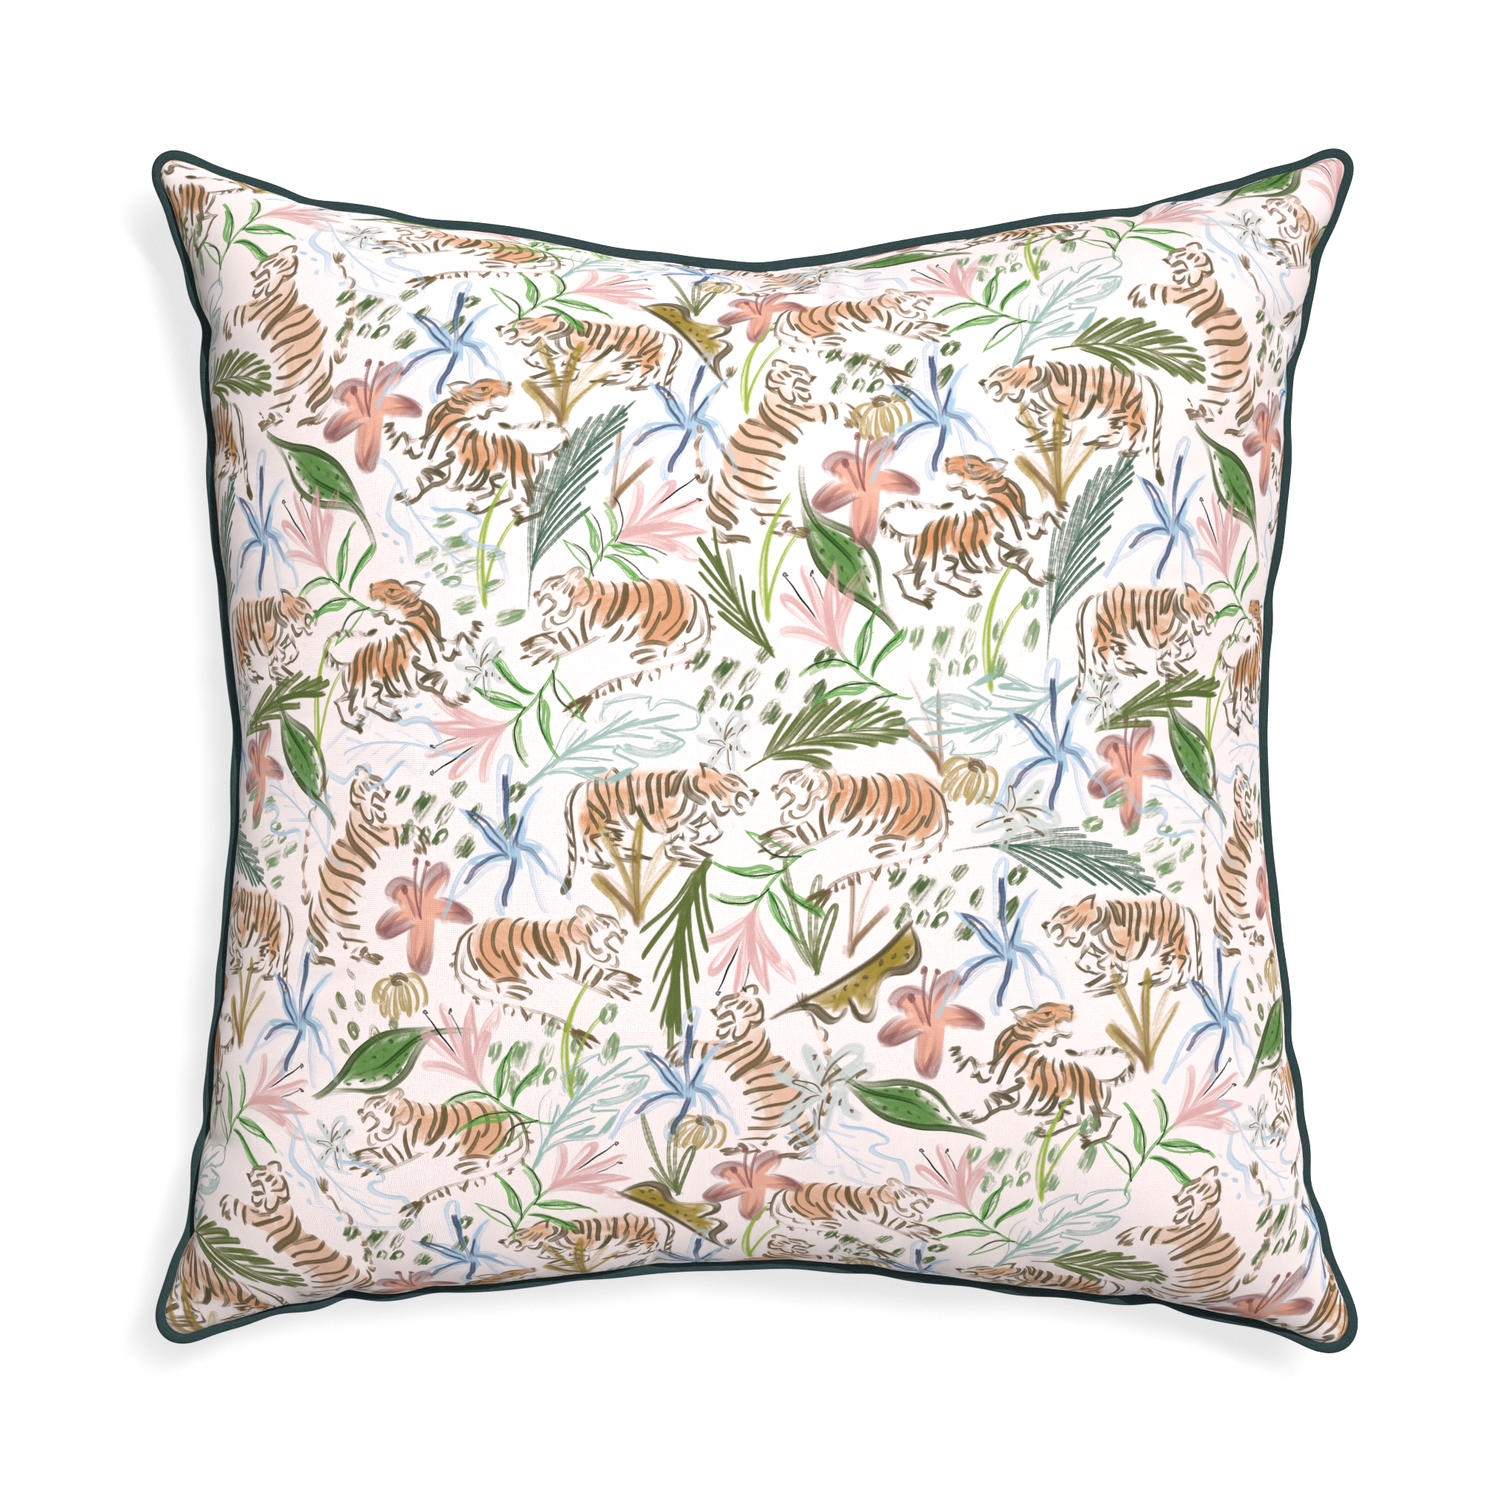 Euro-sham frida pink custom pink chinoiserie tigerpillow with p piping on white background